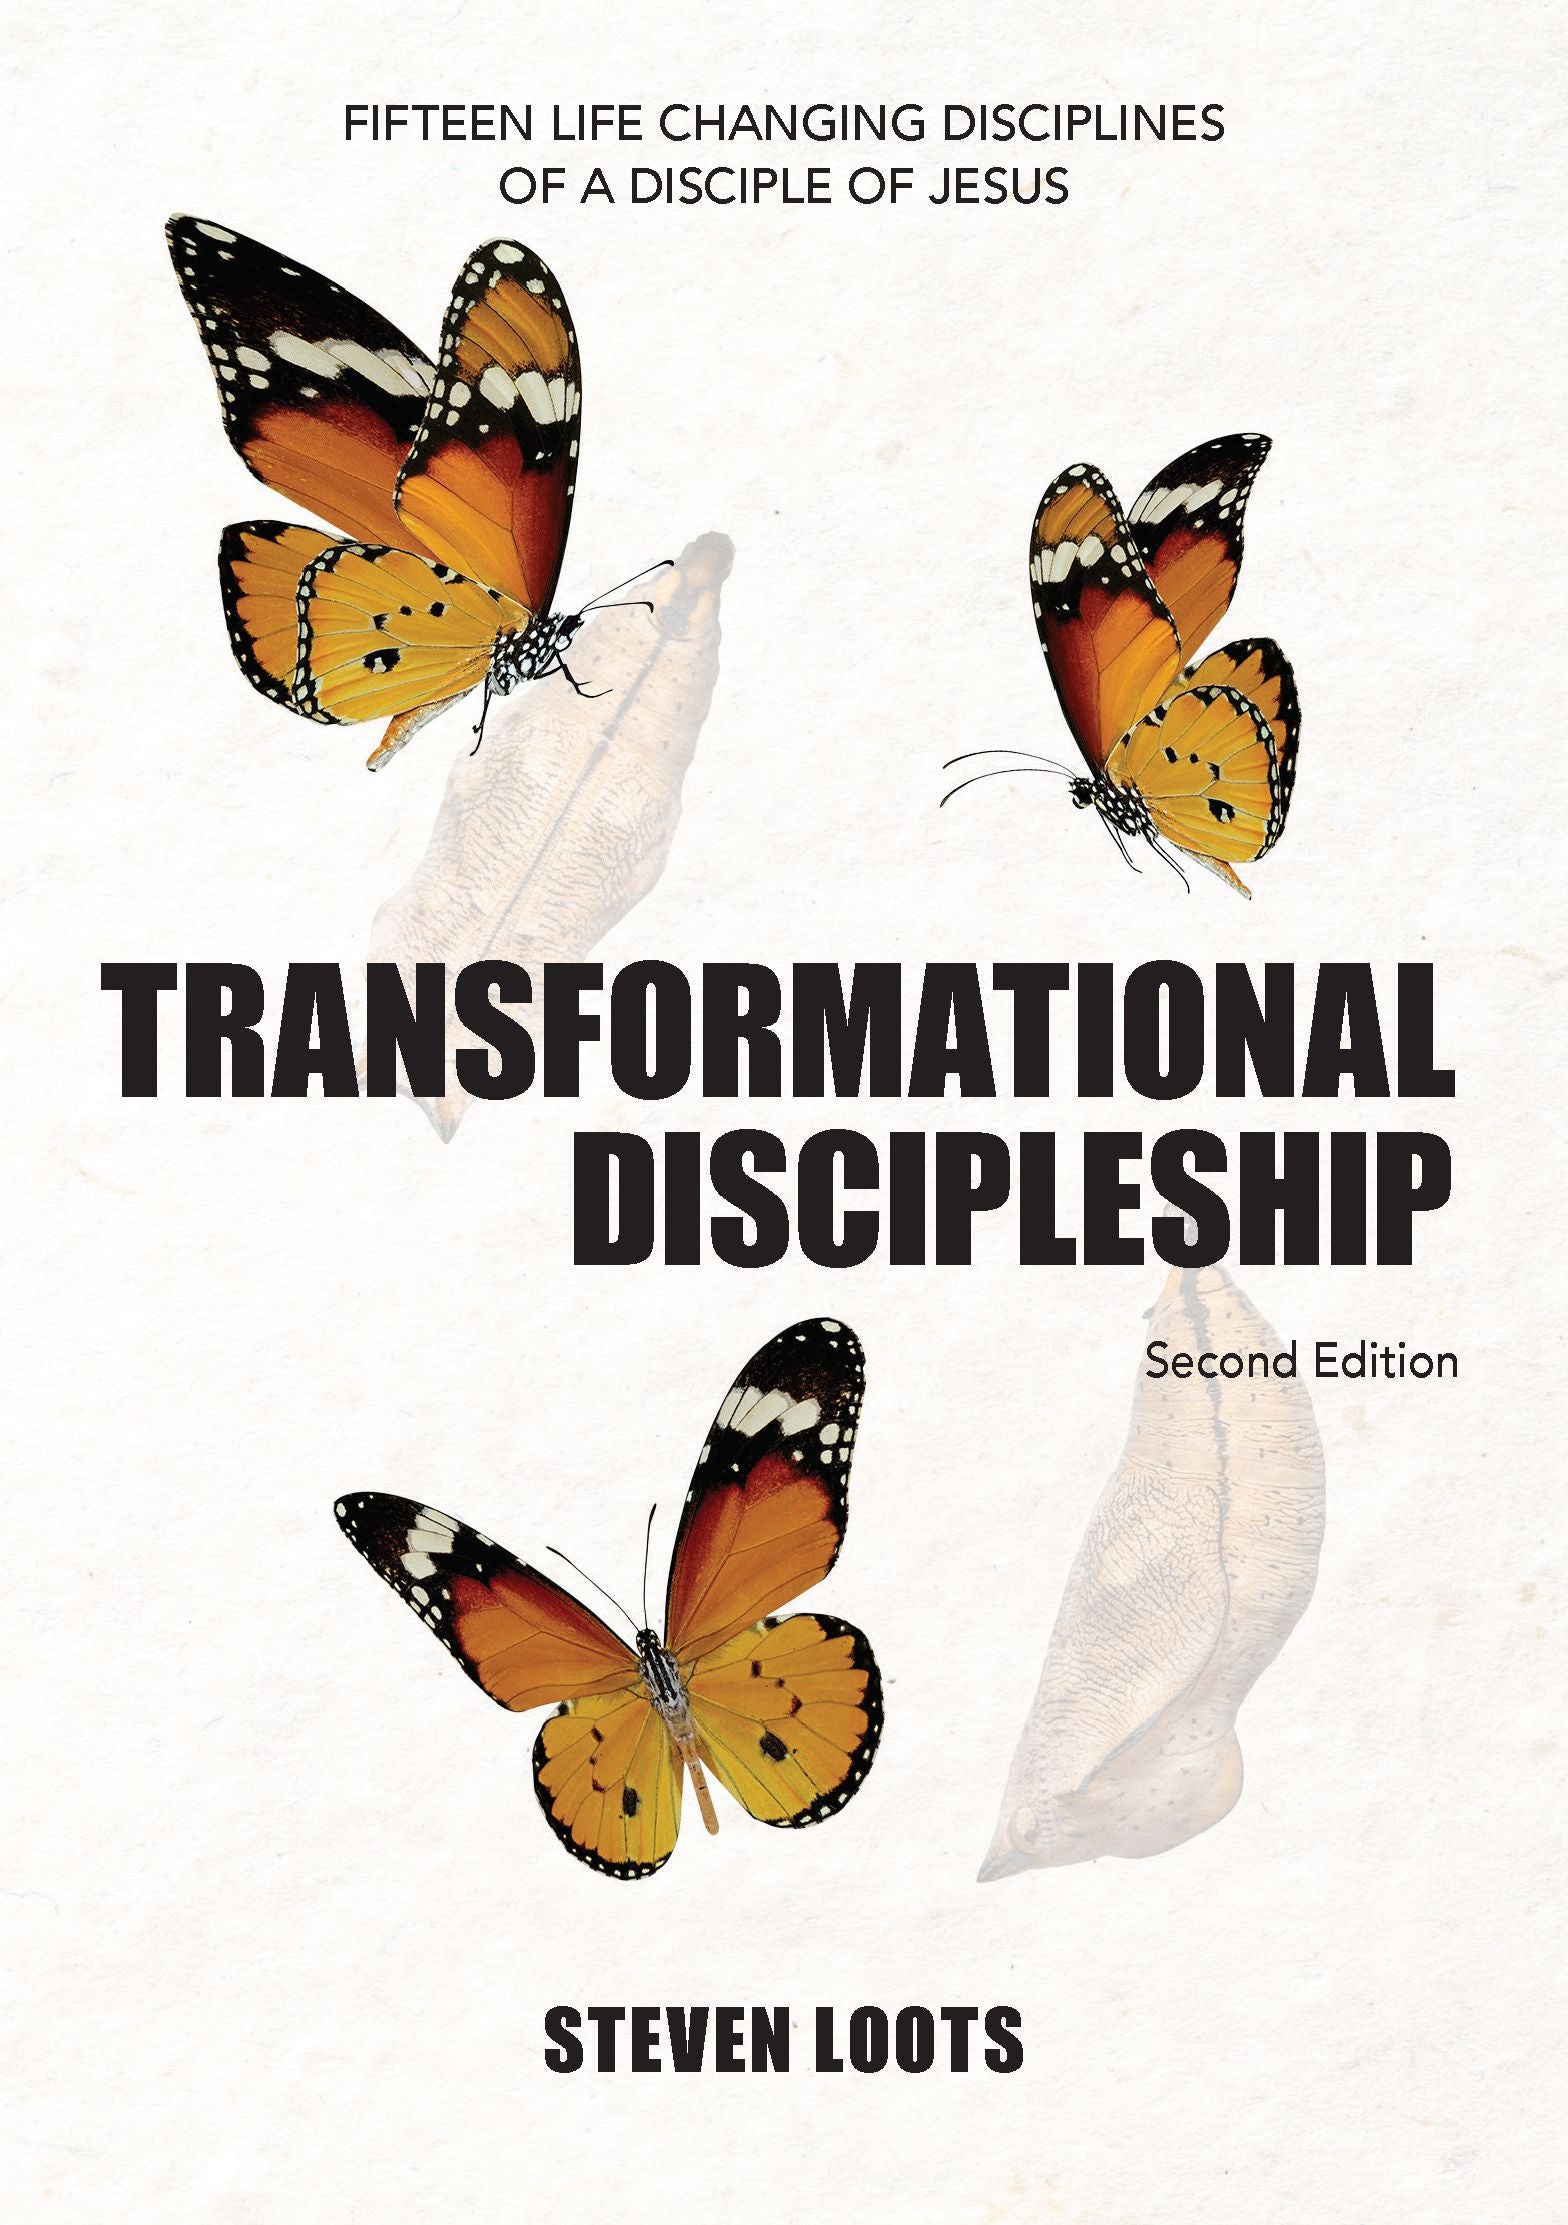 Transformational Discipleship: Fifteen Life Changing Disciplines of a Disciple of Jesus